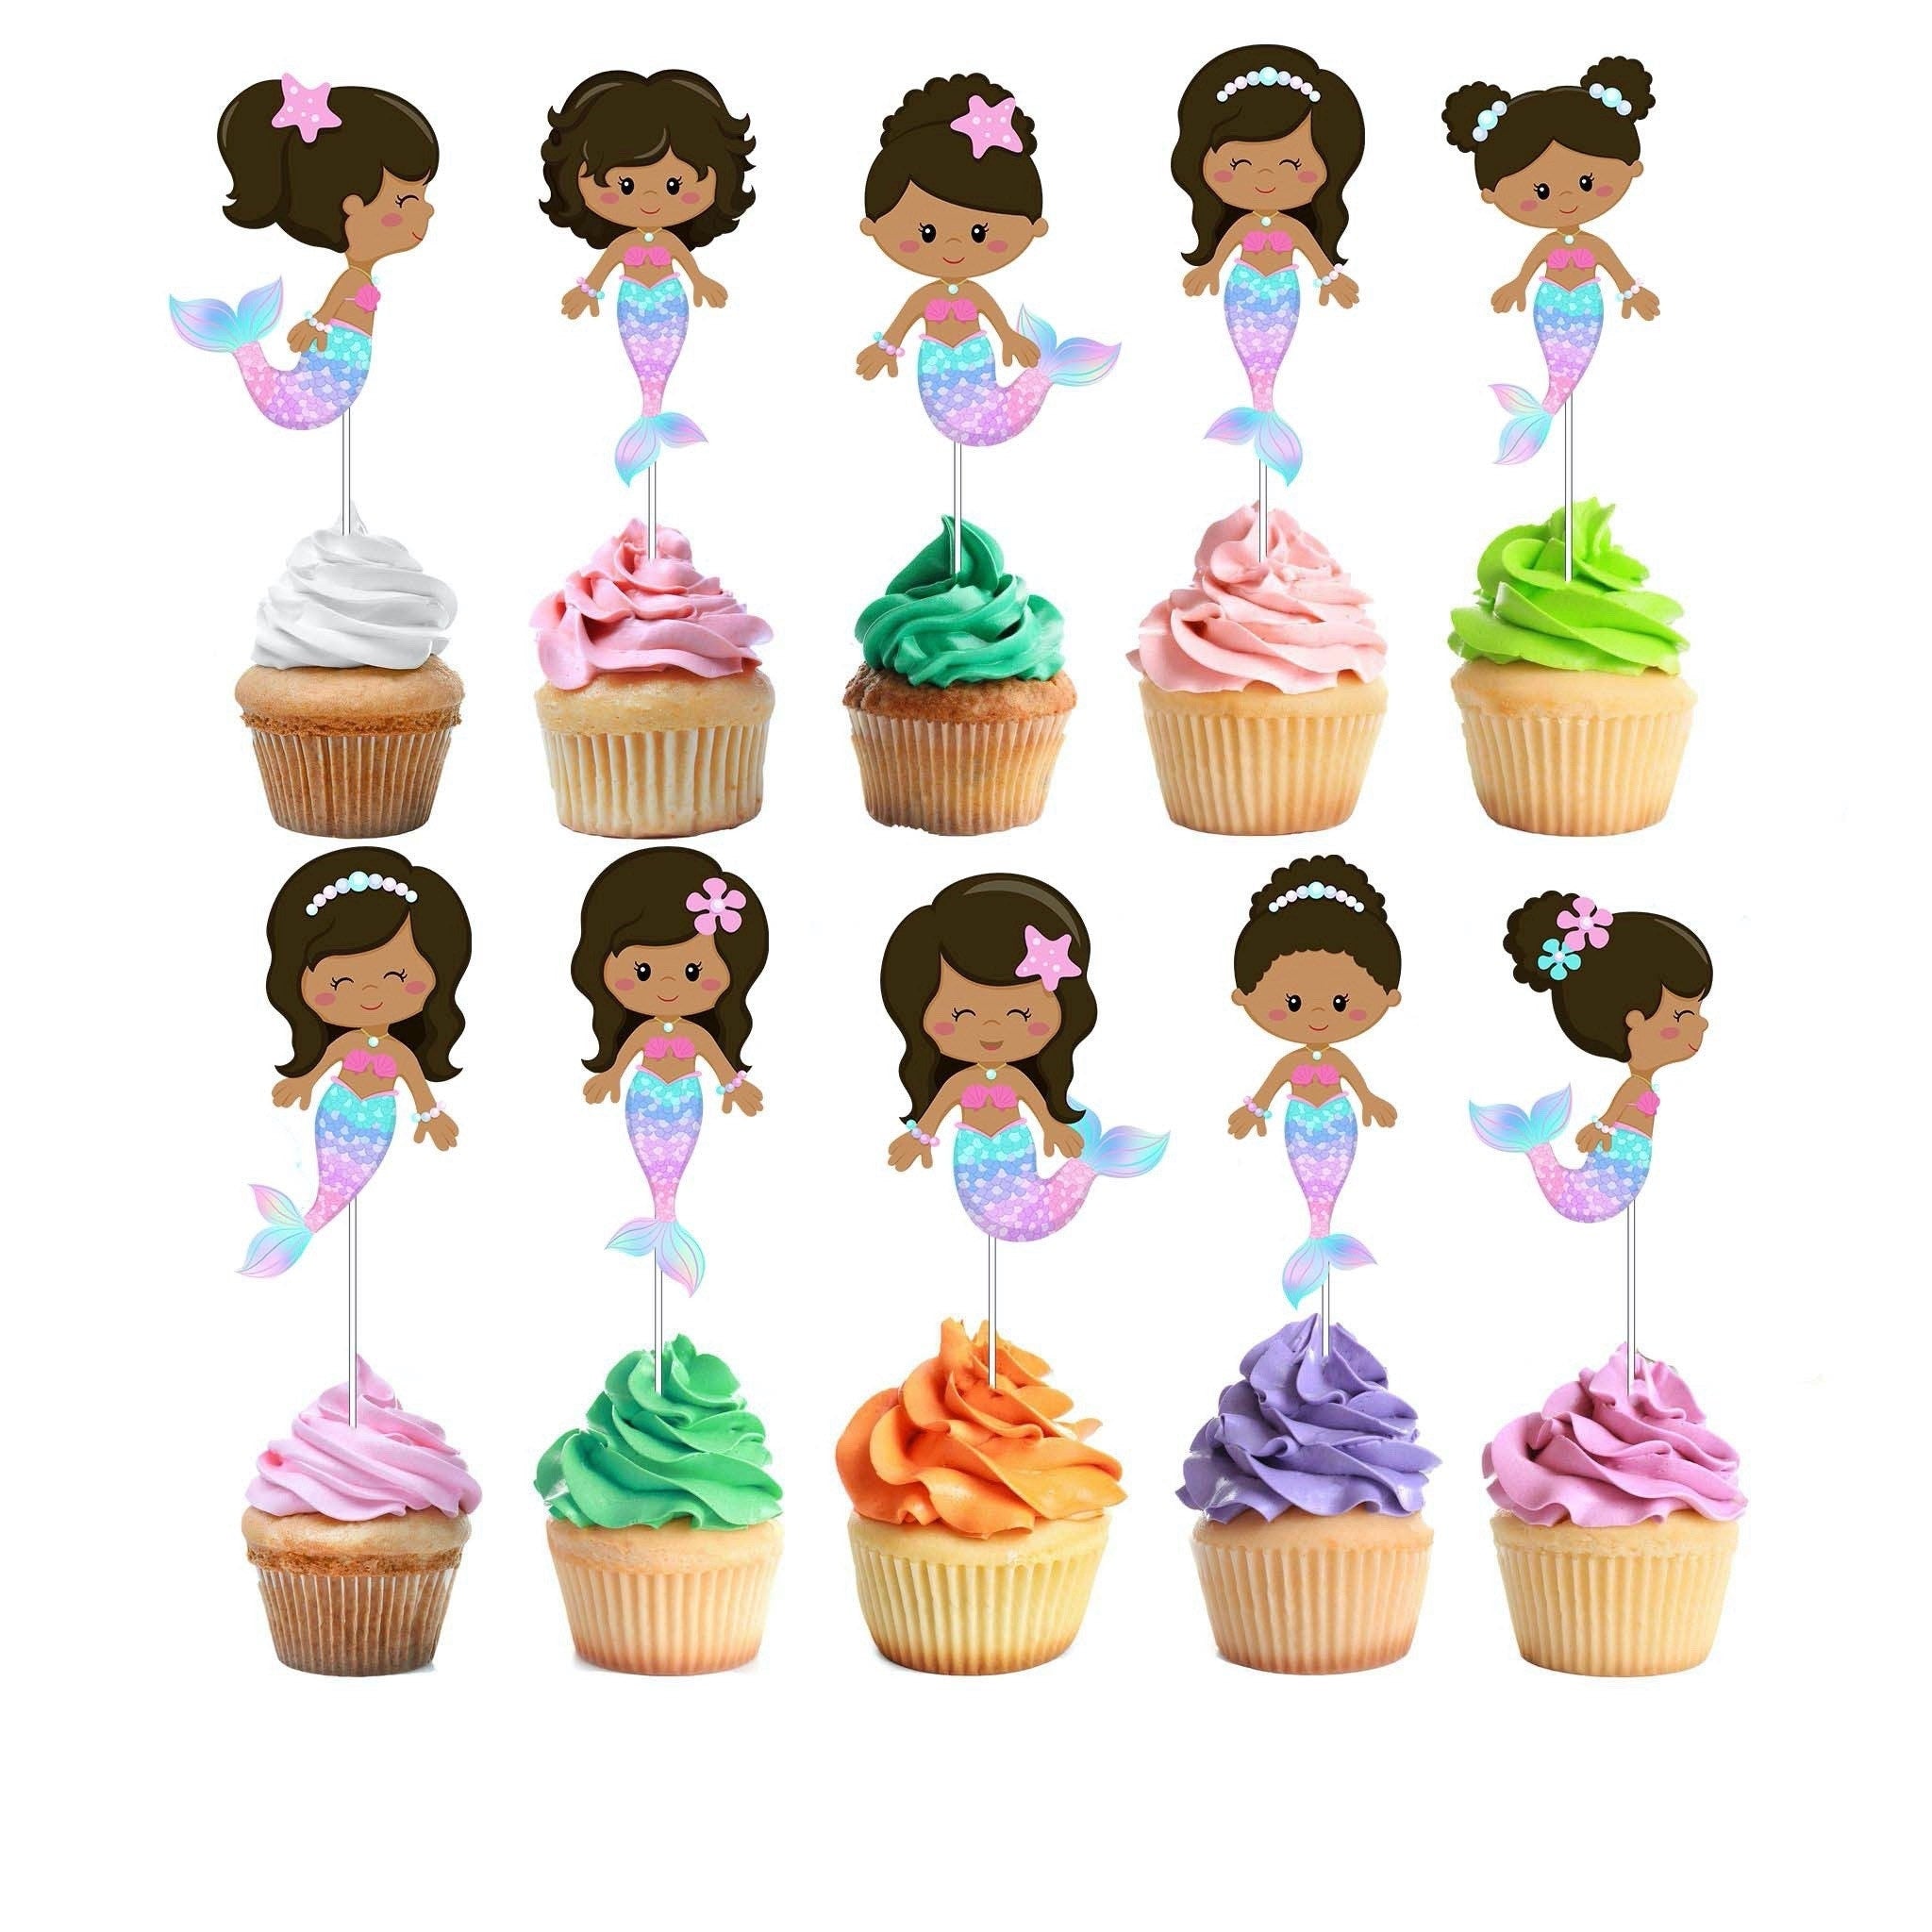 Afro Mermaid Cupcake Toppers - Perfect for Birthday Celebrations and Party Decorations